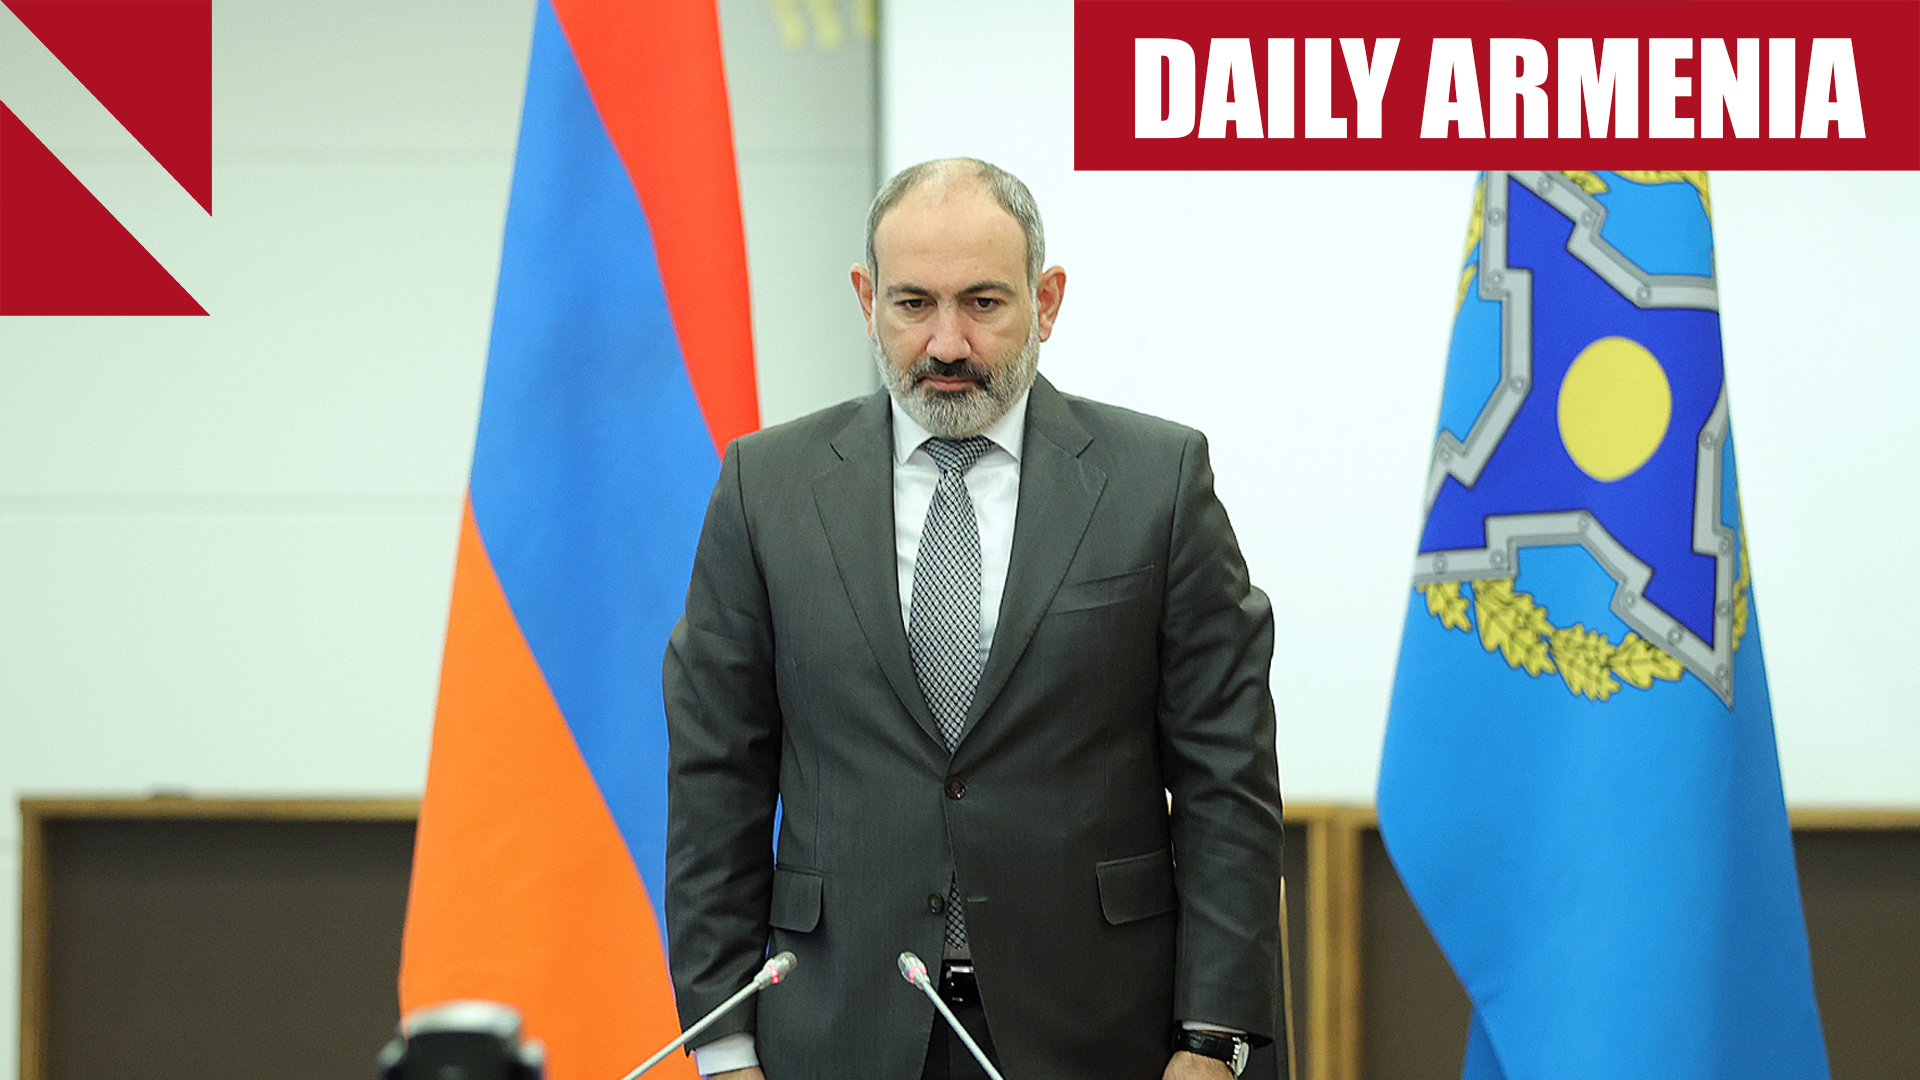 Pashinyan says Armenia has ‘frozen’ participation in Russian military alliance